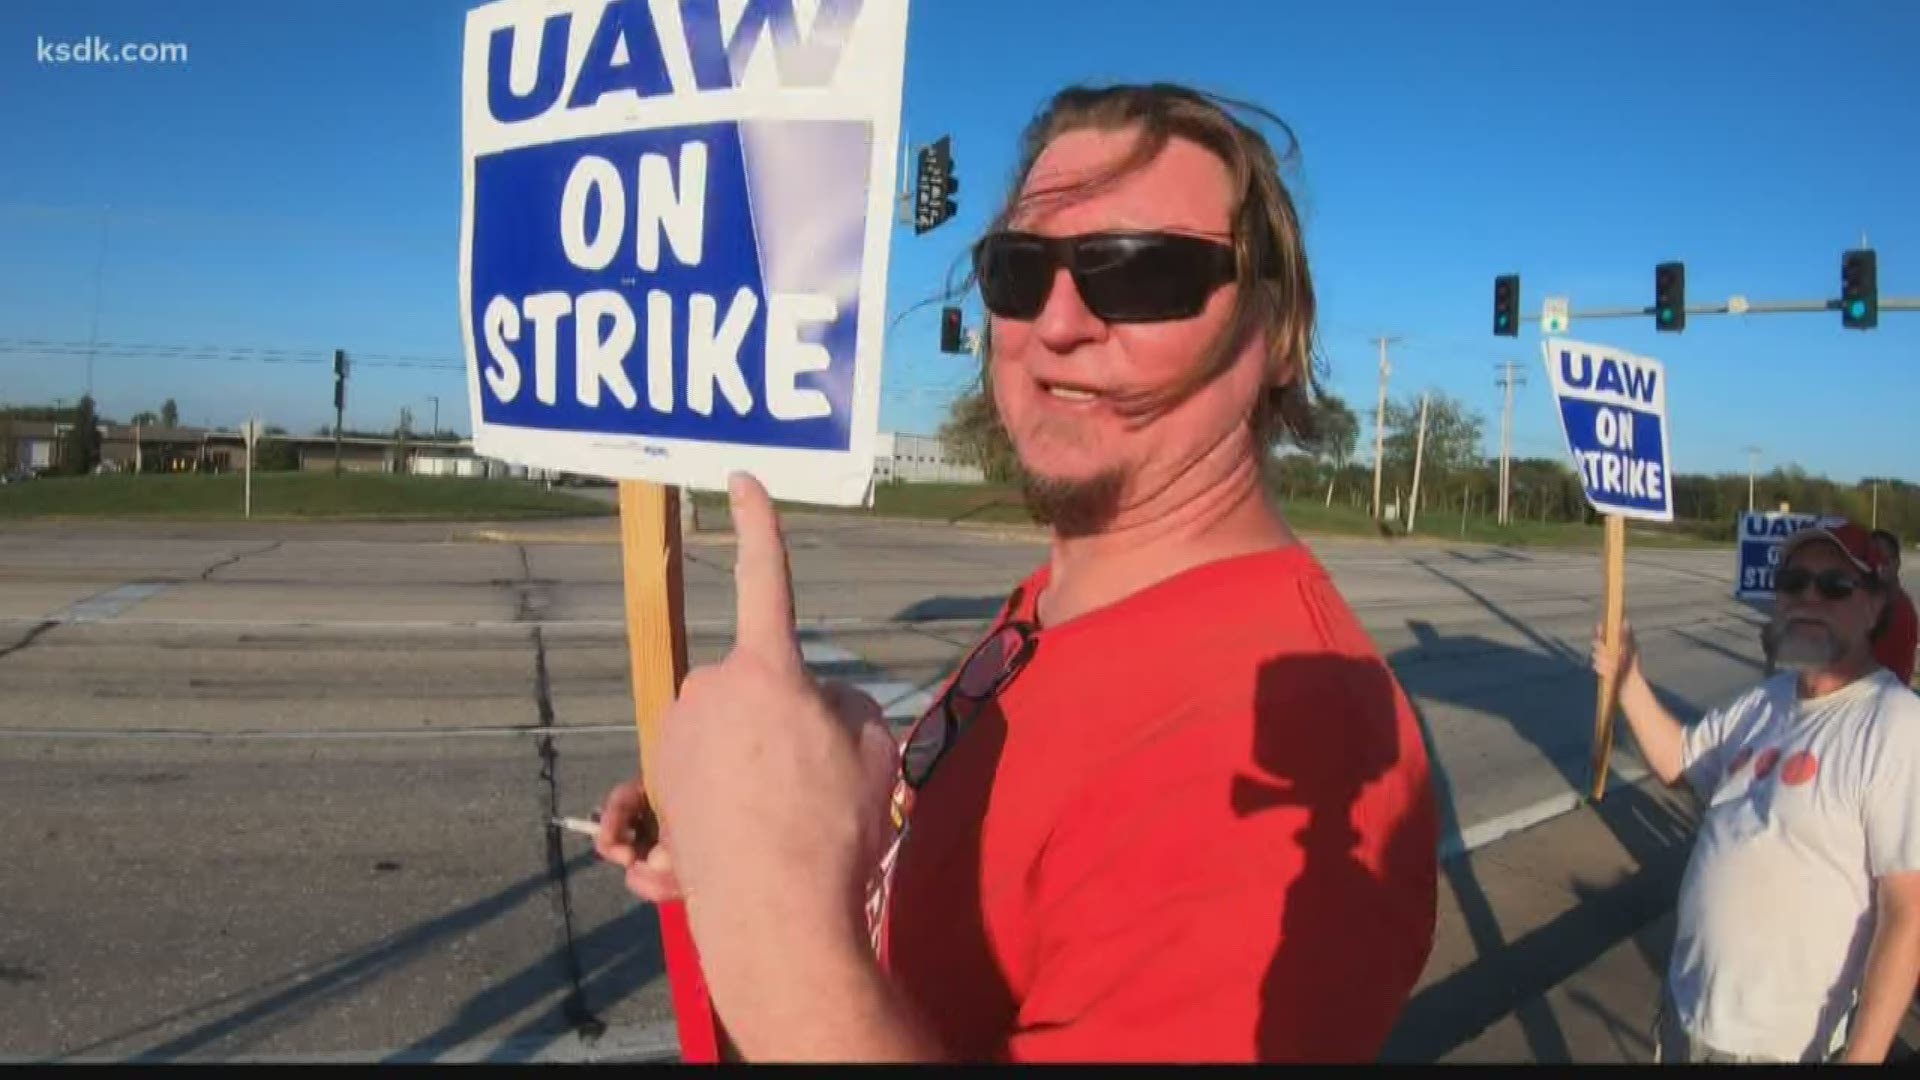 GM isn't the only company feeling the impact of the strike.